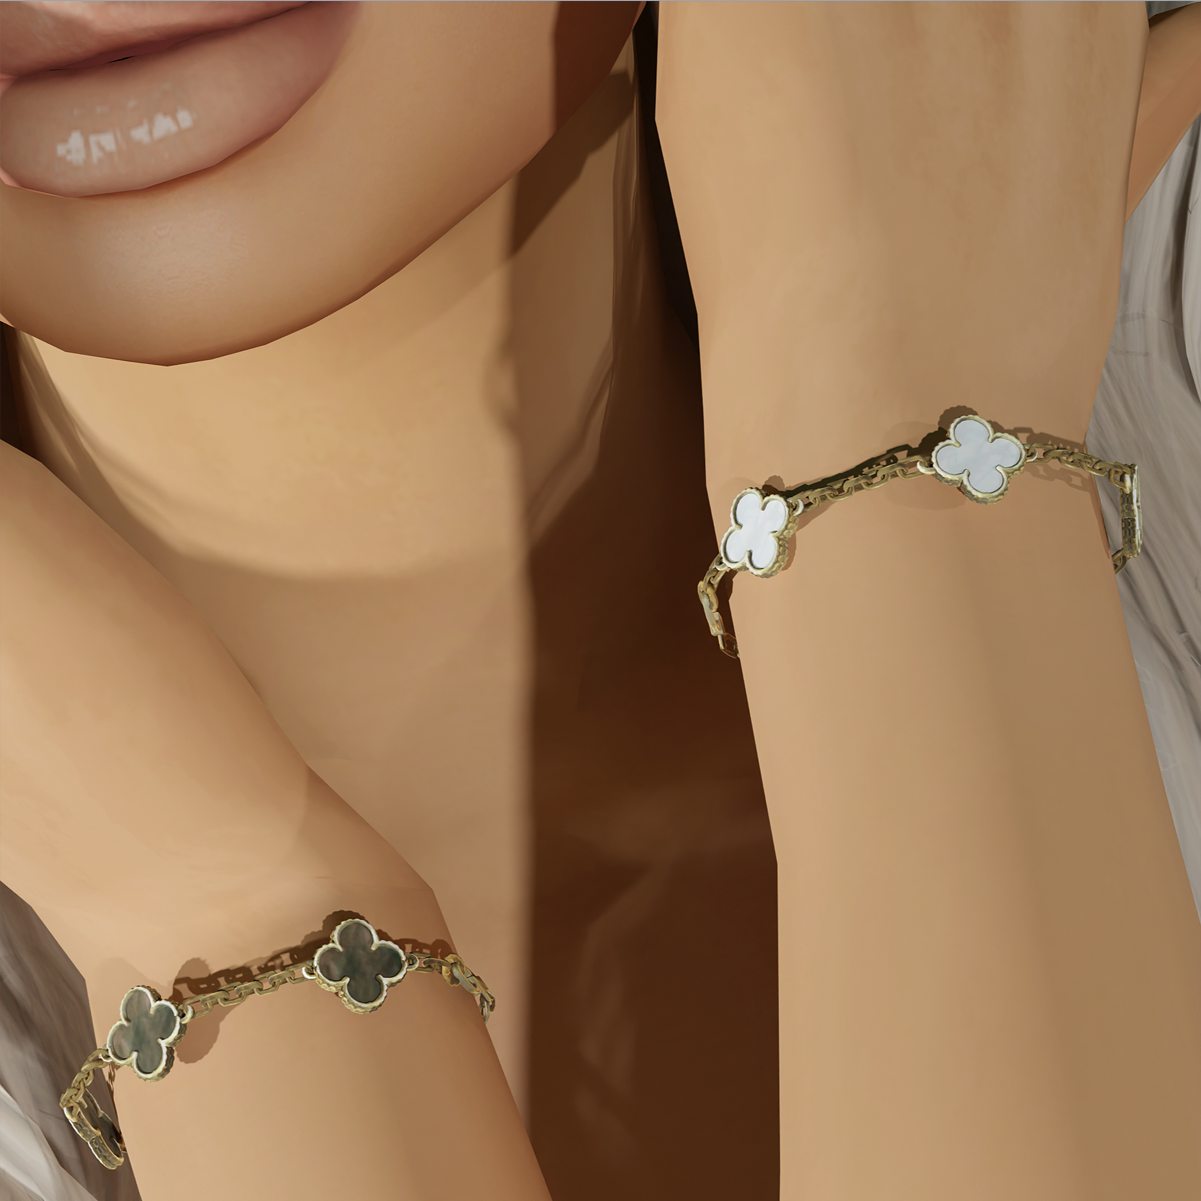 The Sims 4 Friendship Bracelets Growing Together Guide